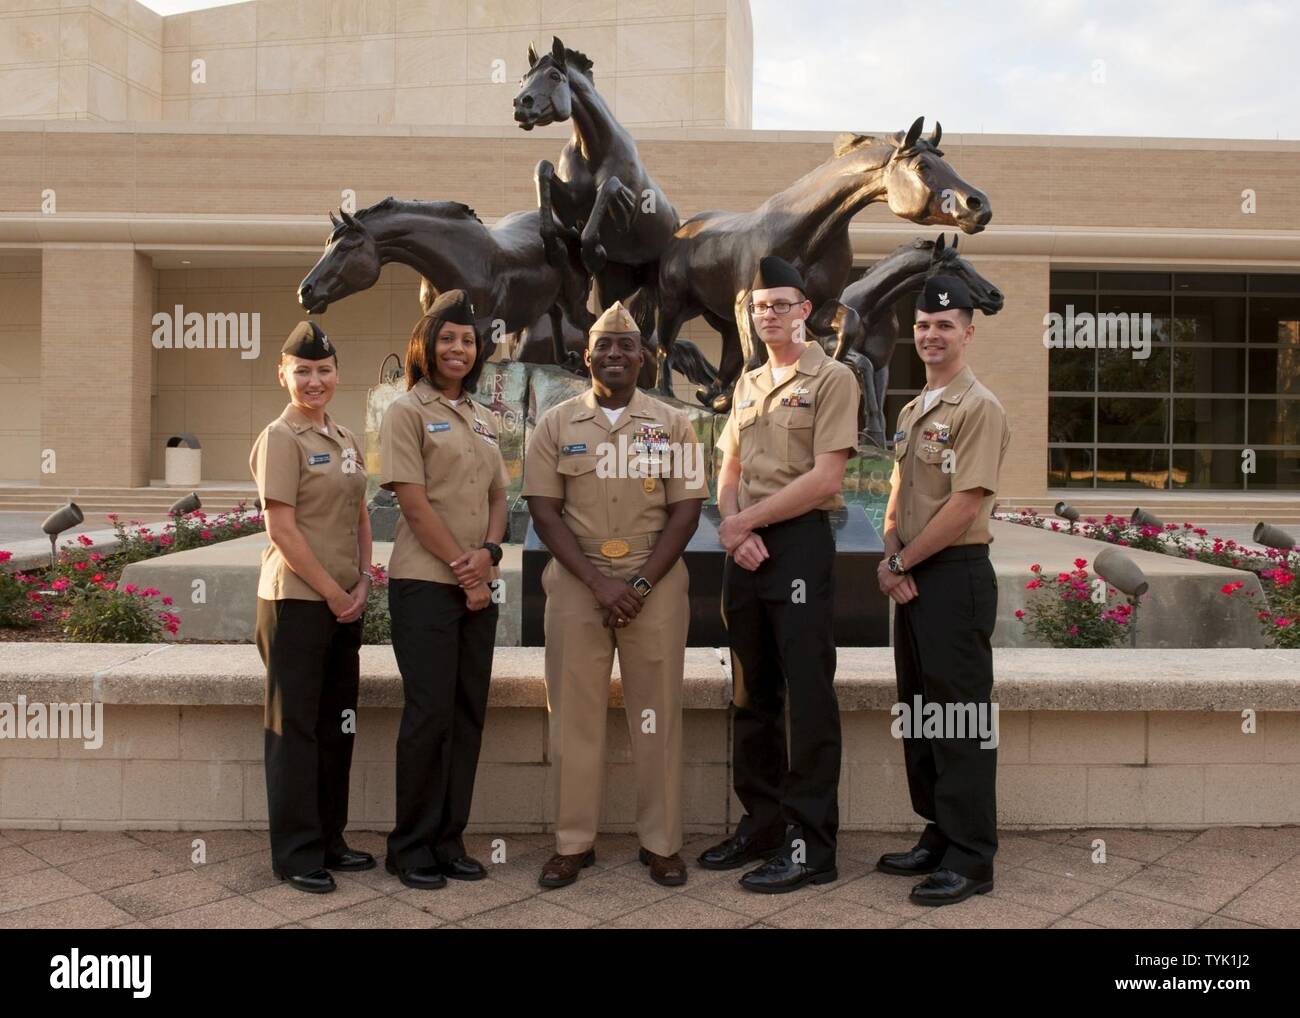 (COLLEGE STATION, Texas) USS George H.W. Bush (CVN 77) Command Master Chief Huben Phillips and the Sailors of the Year for the aircraft carrier USS George H.W. Bush (CVN 77) pose for a portrait during a tour of Texas A&M University in College Station, Texas. The tour is part of a two-day namesake trip to Texas where Sailors engaged with the local community about the importance of the Navy. Stock Photo